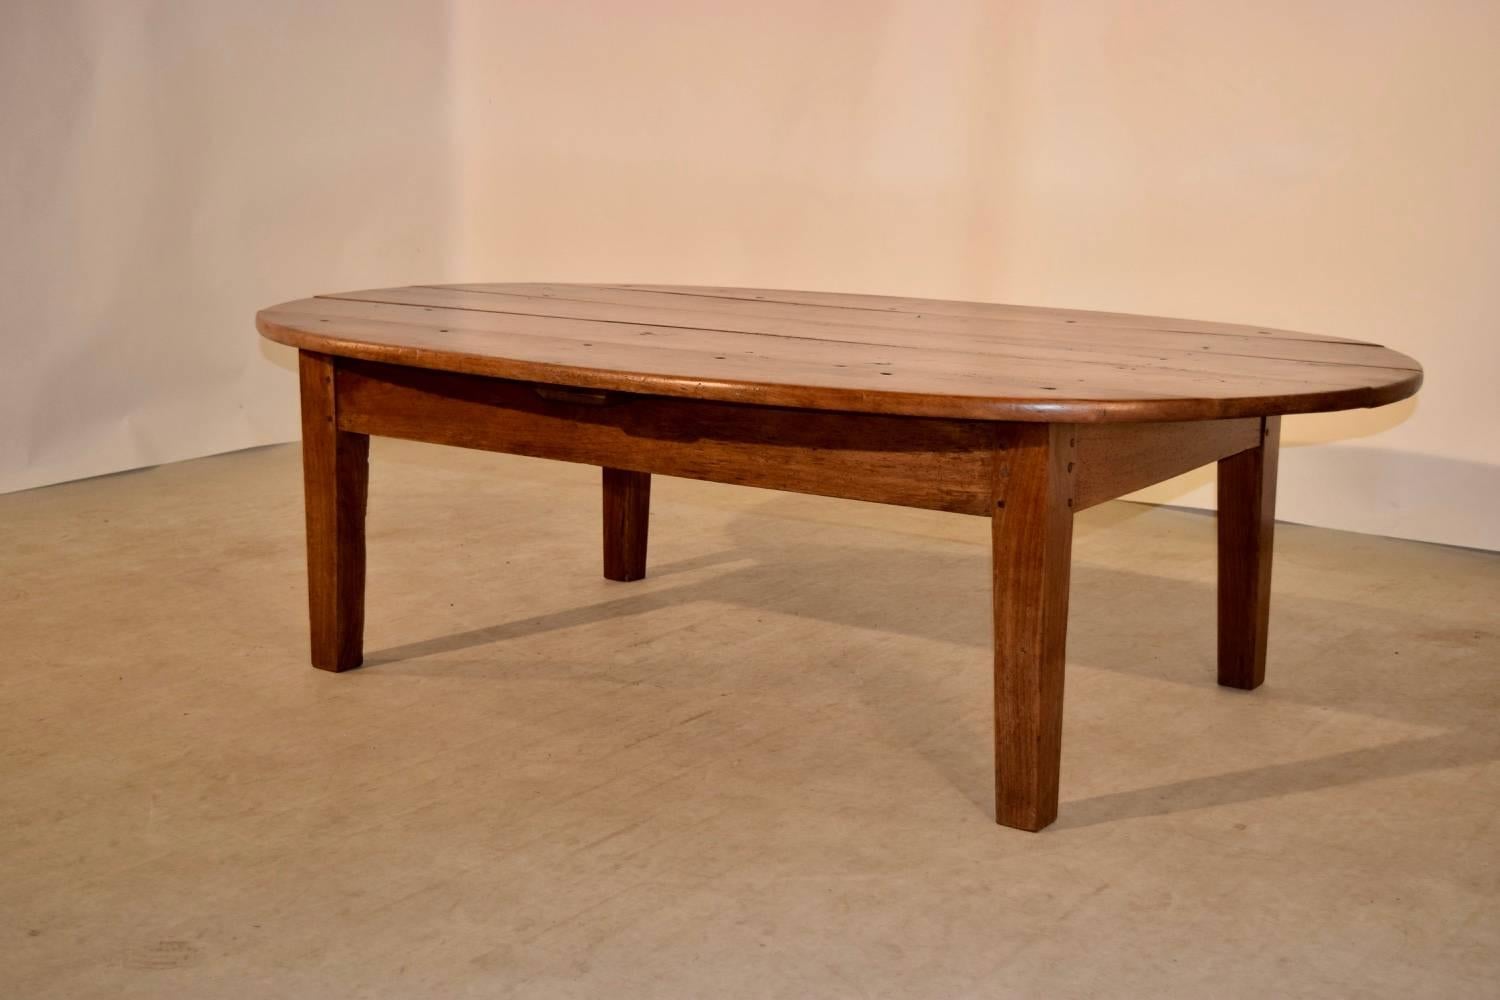 Early 19th century cherry coffee table from France. The top is made up of five planks, following down to a simple apron and raised on tapered legs.